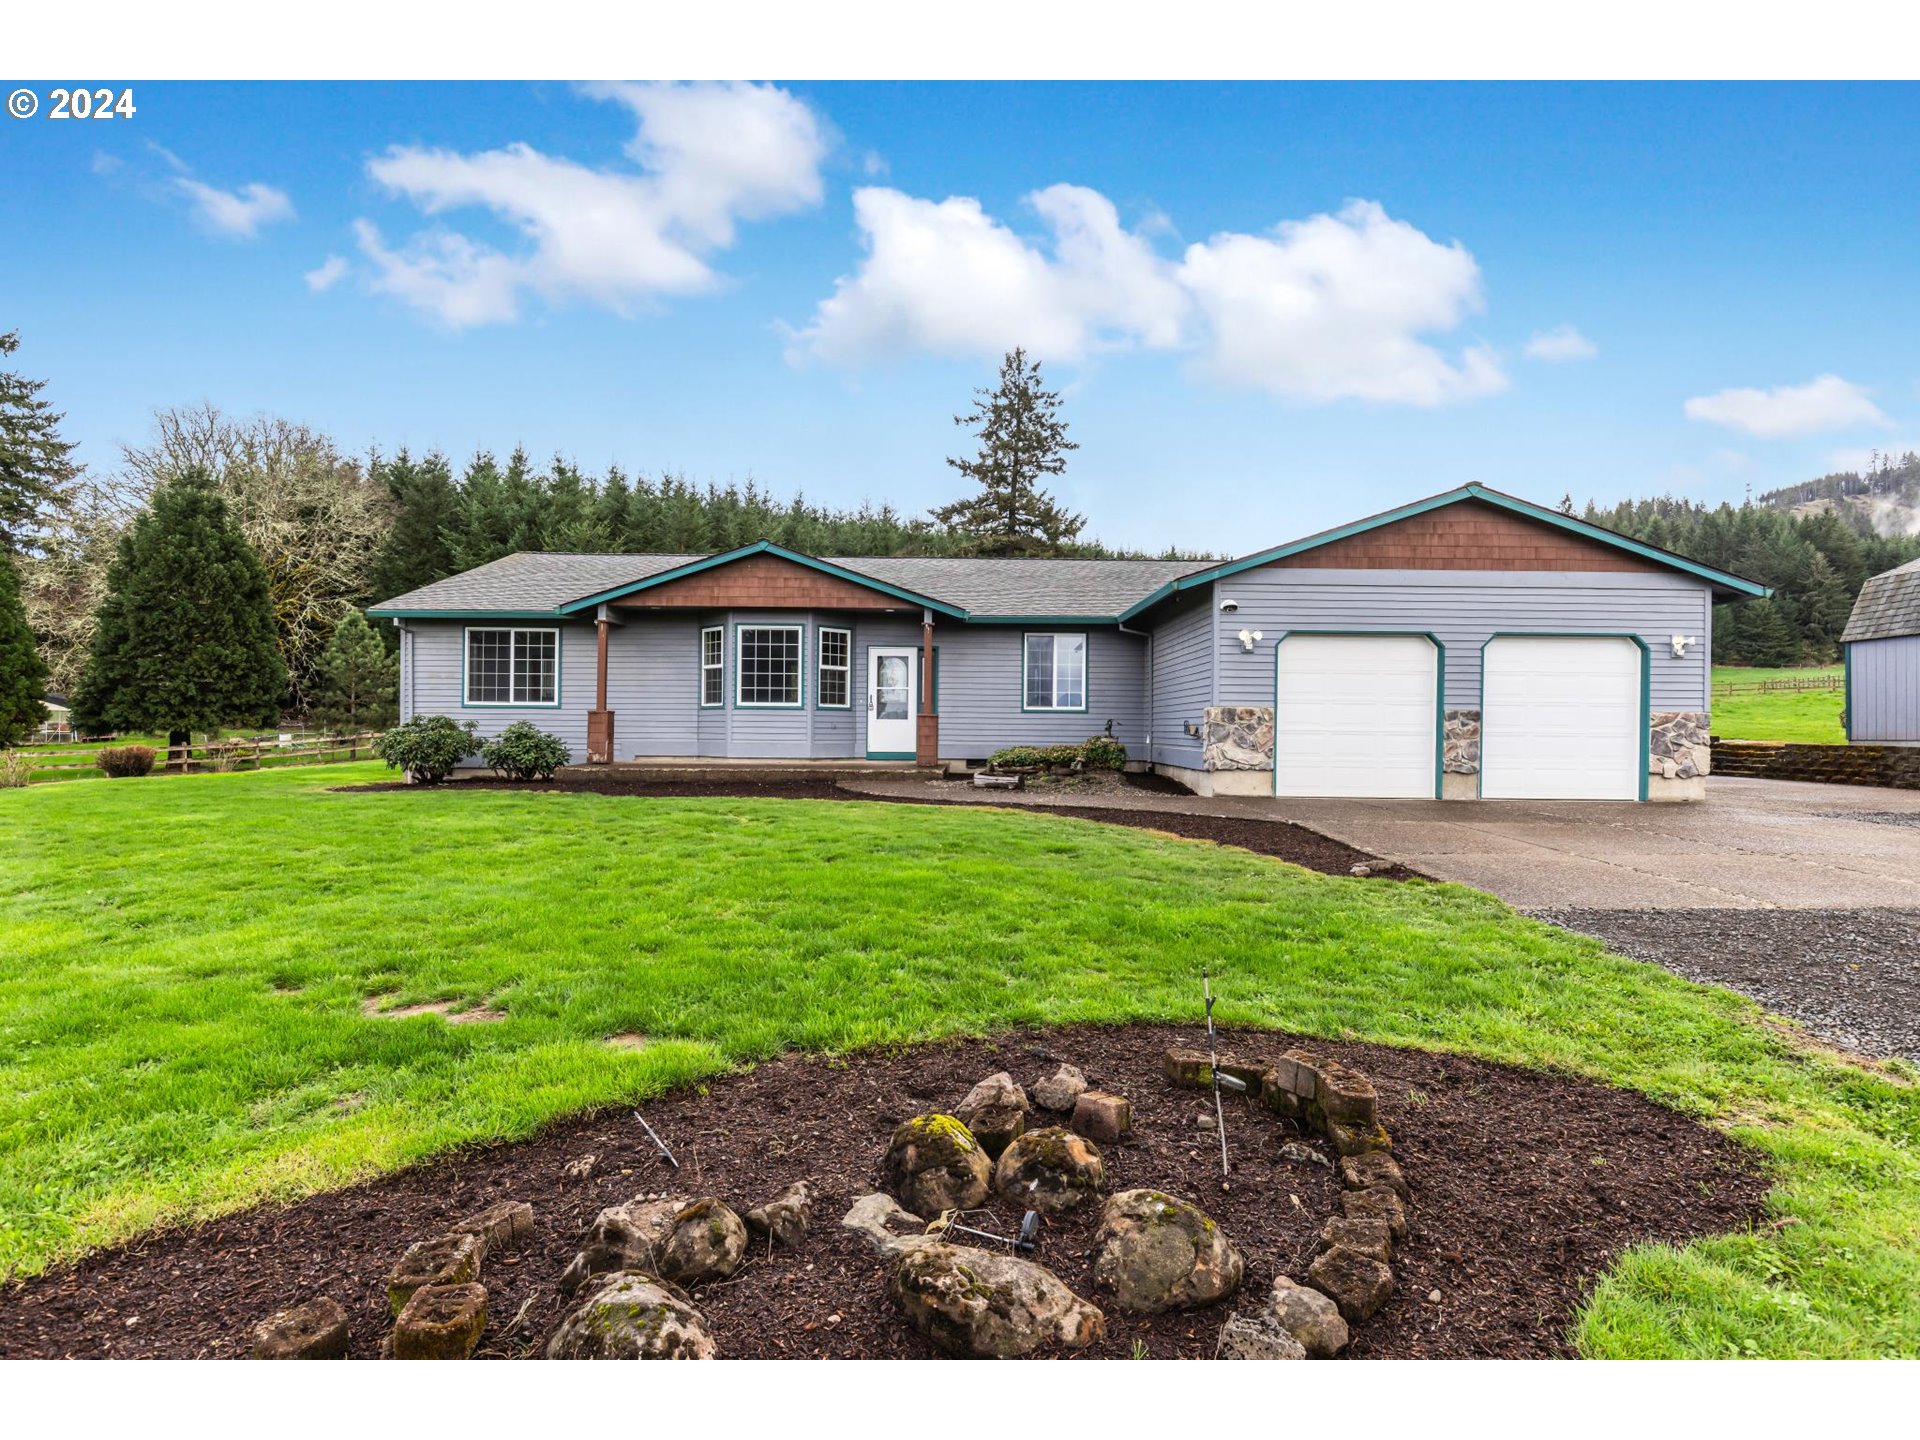 45560 NW BUCKLEY RD, Forest Grove, OR 